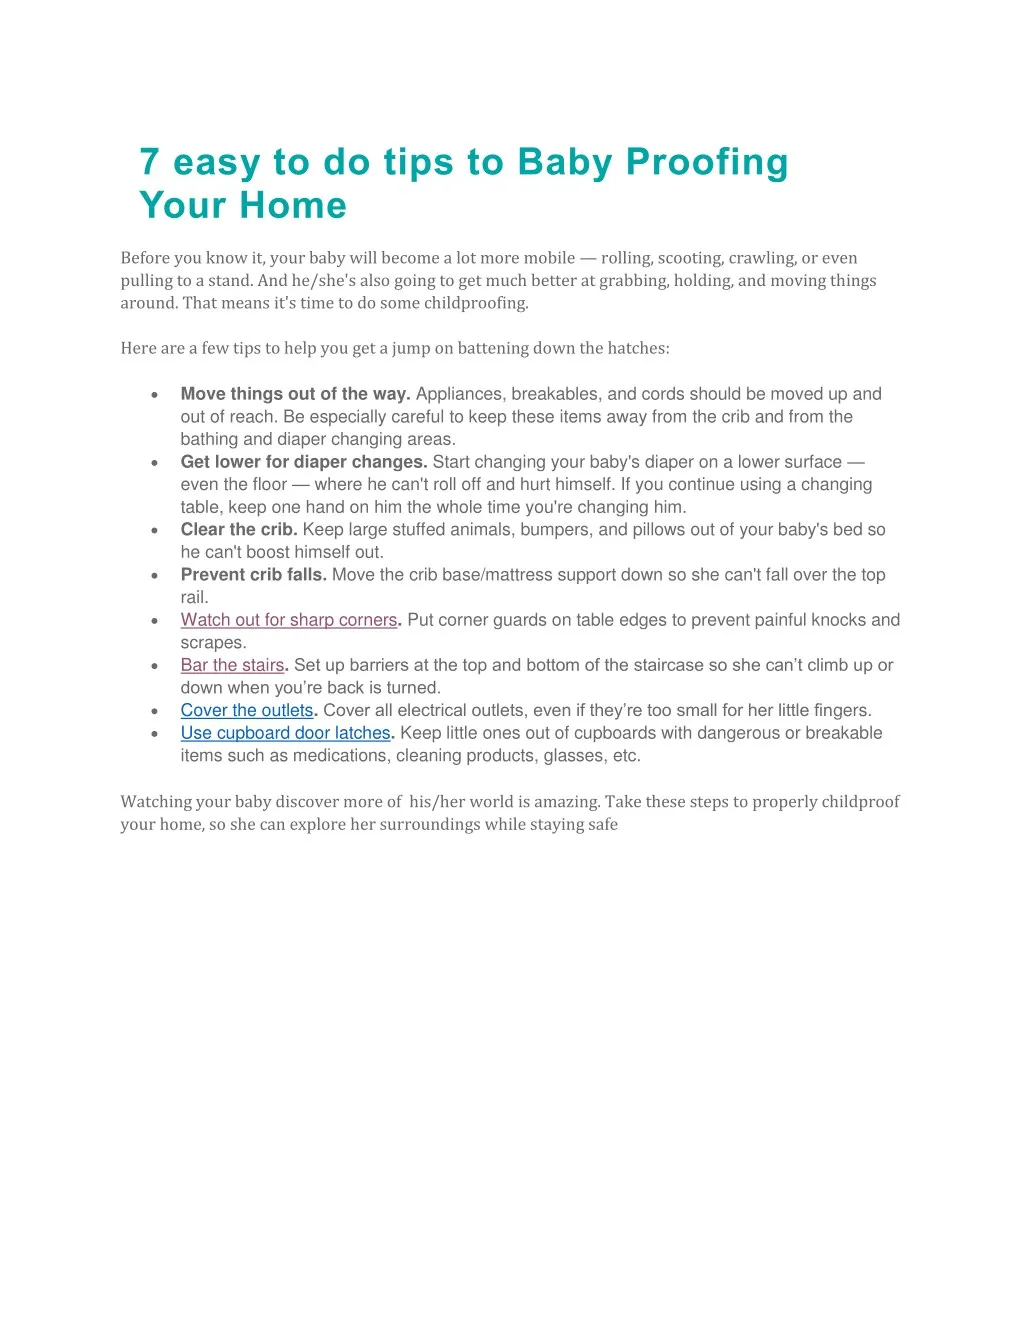 7 easy to do tips to baby proofing your home